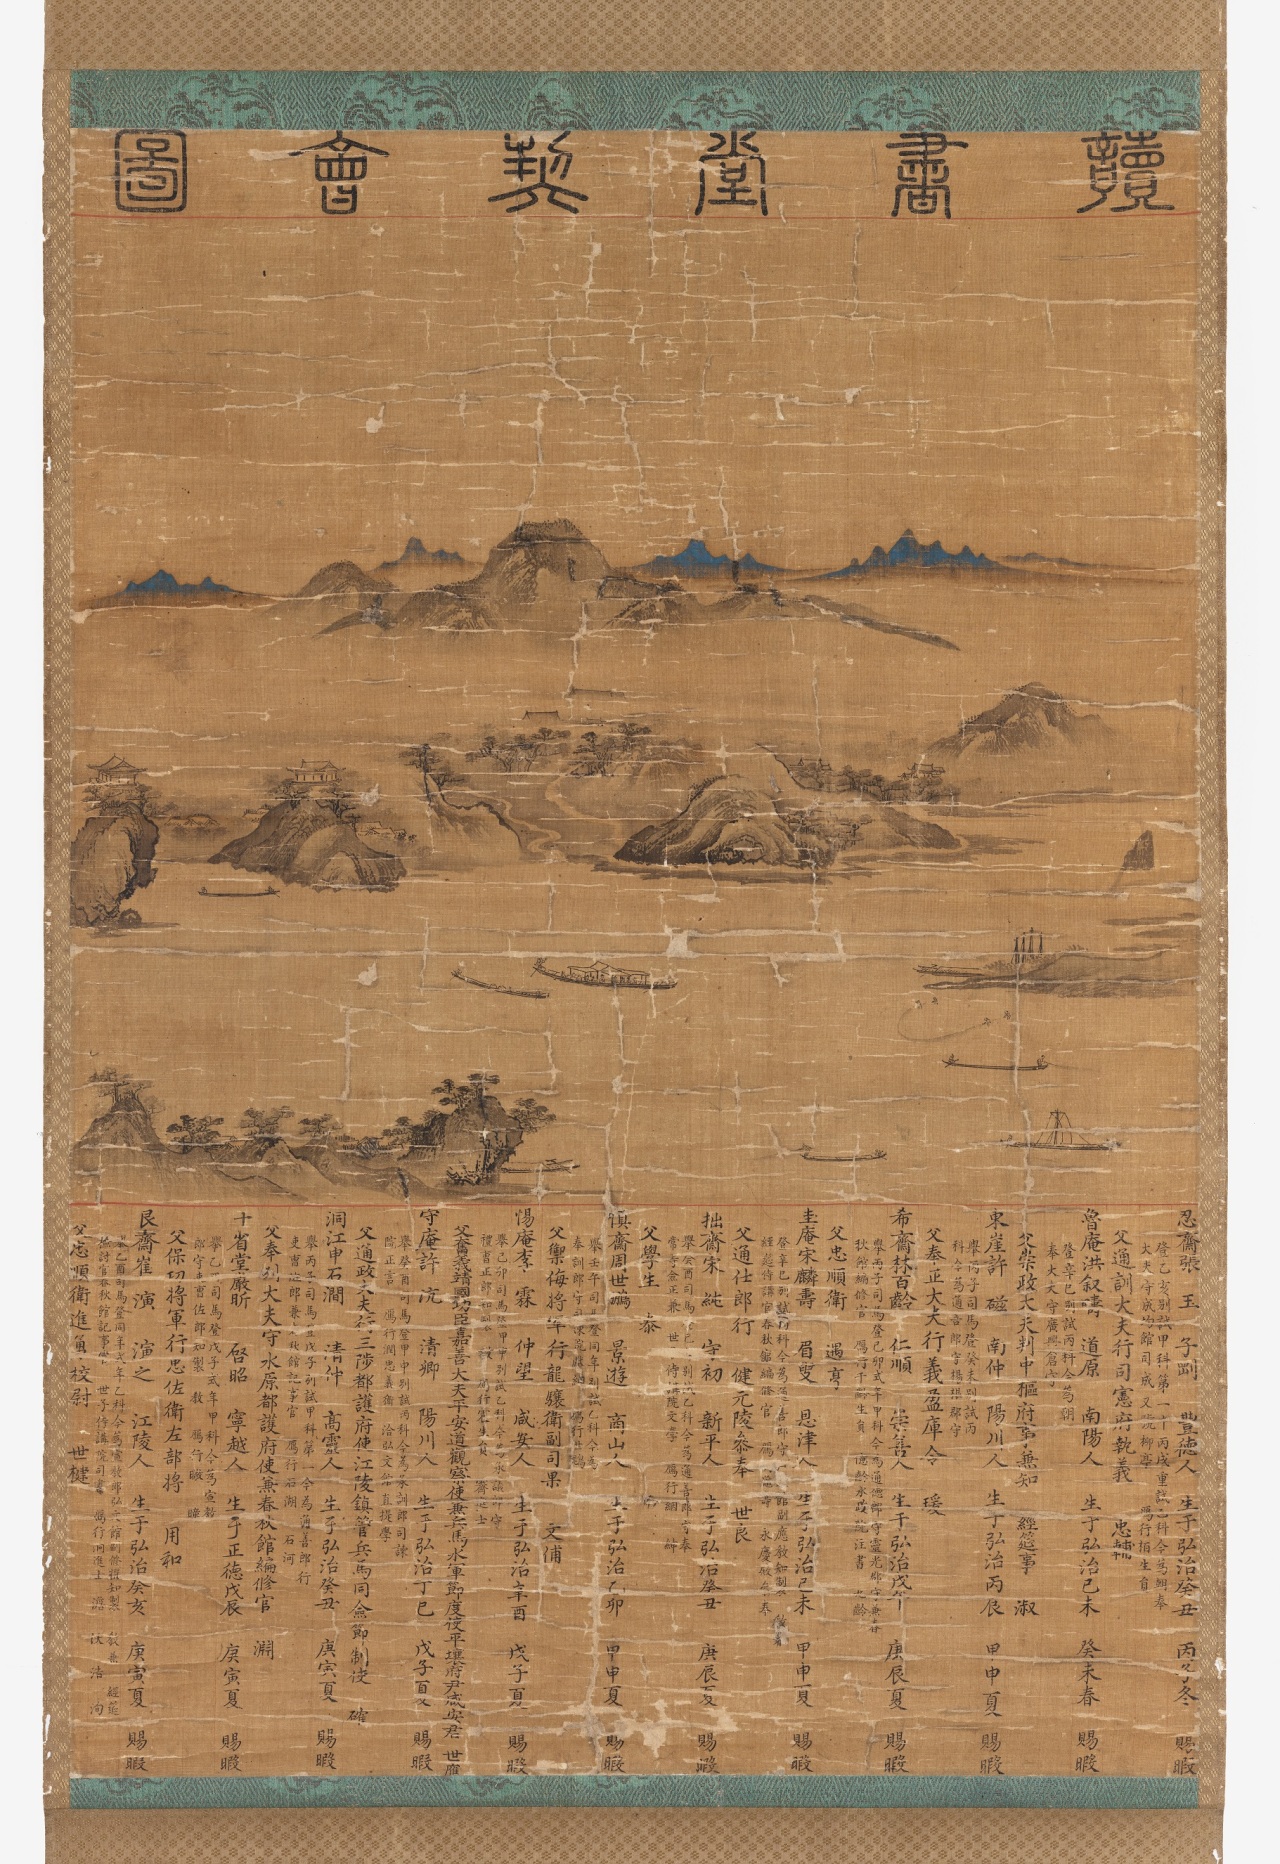 Painting of “Dokseodanggyehoedo,” estimated to be produced in the year 1531 (CHA)